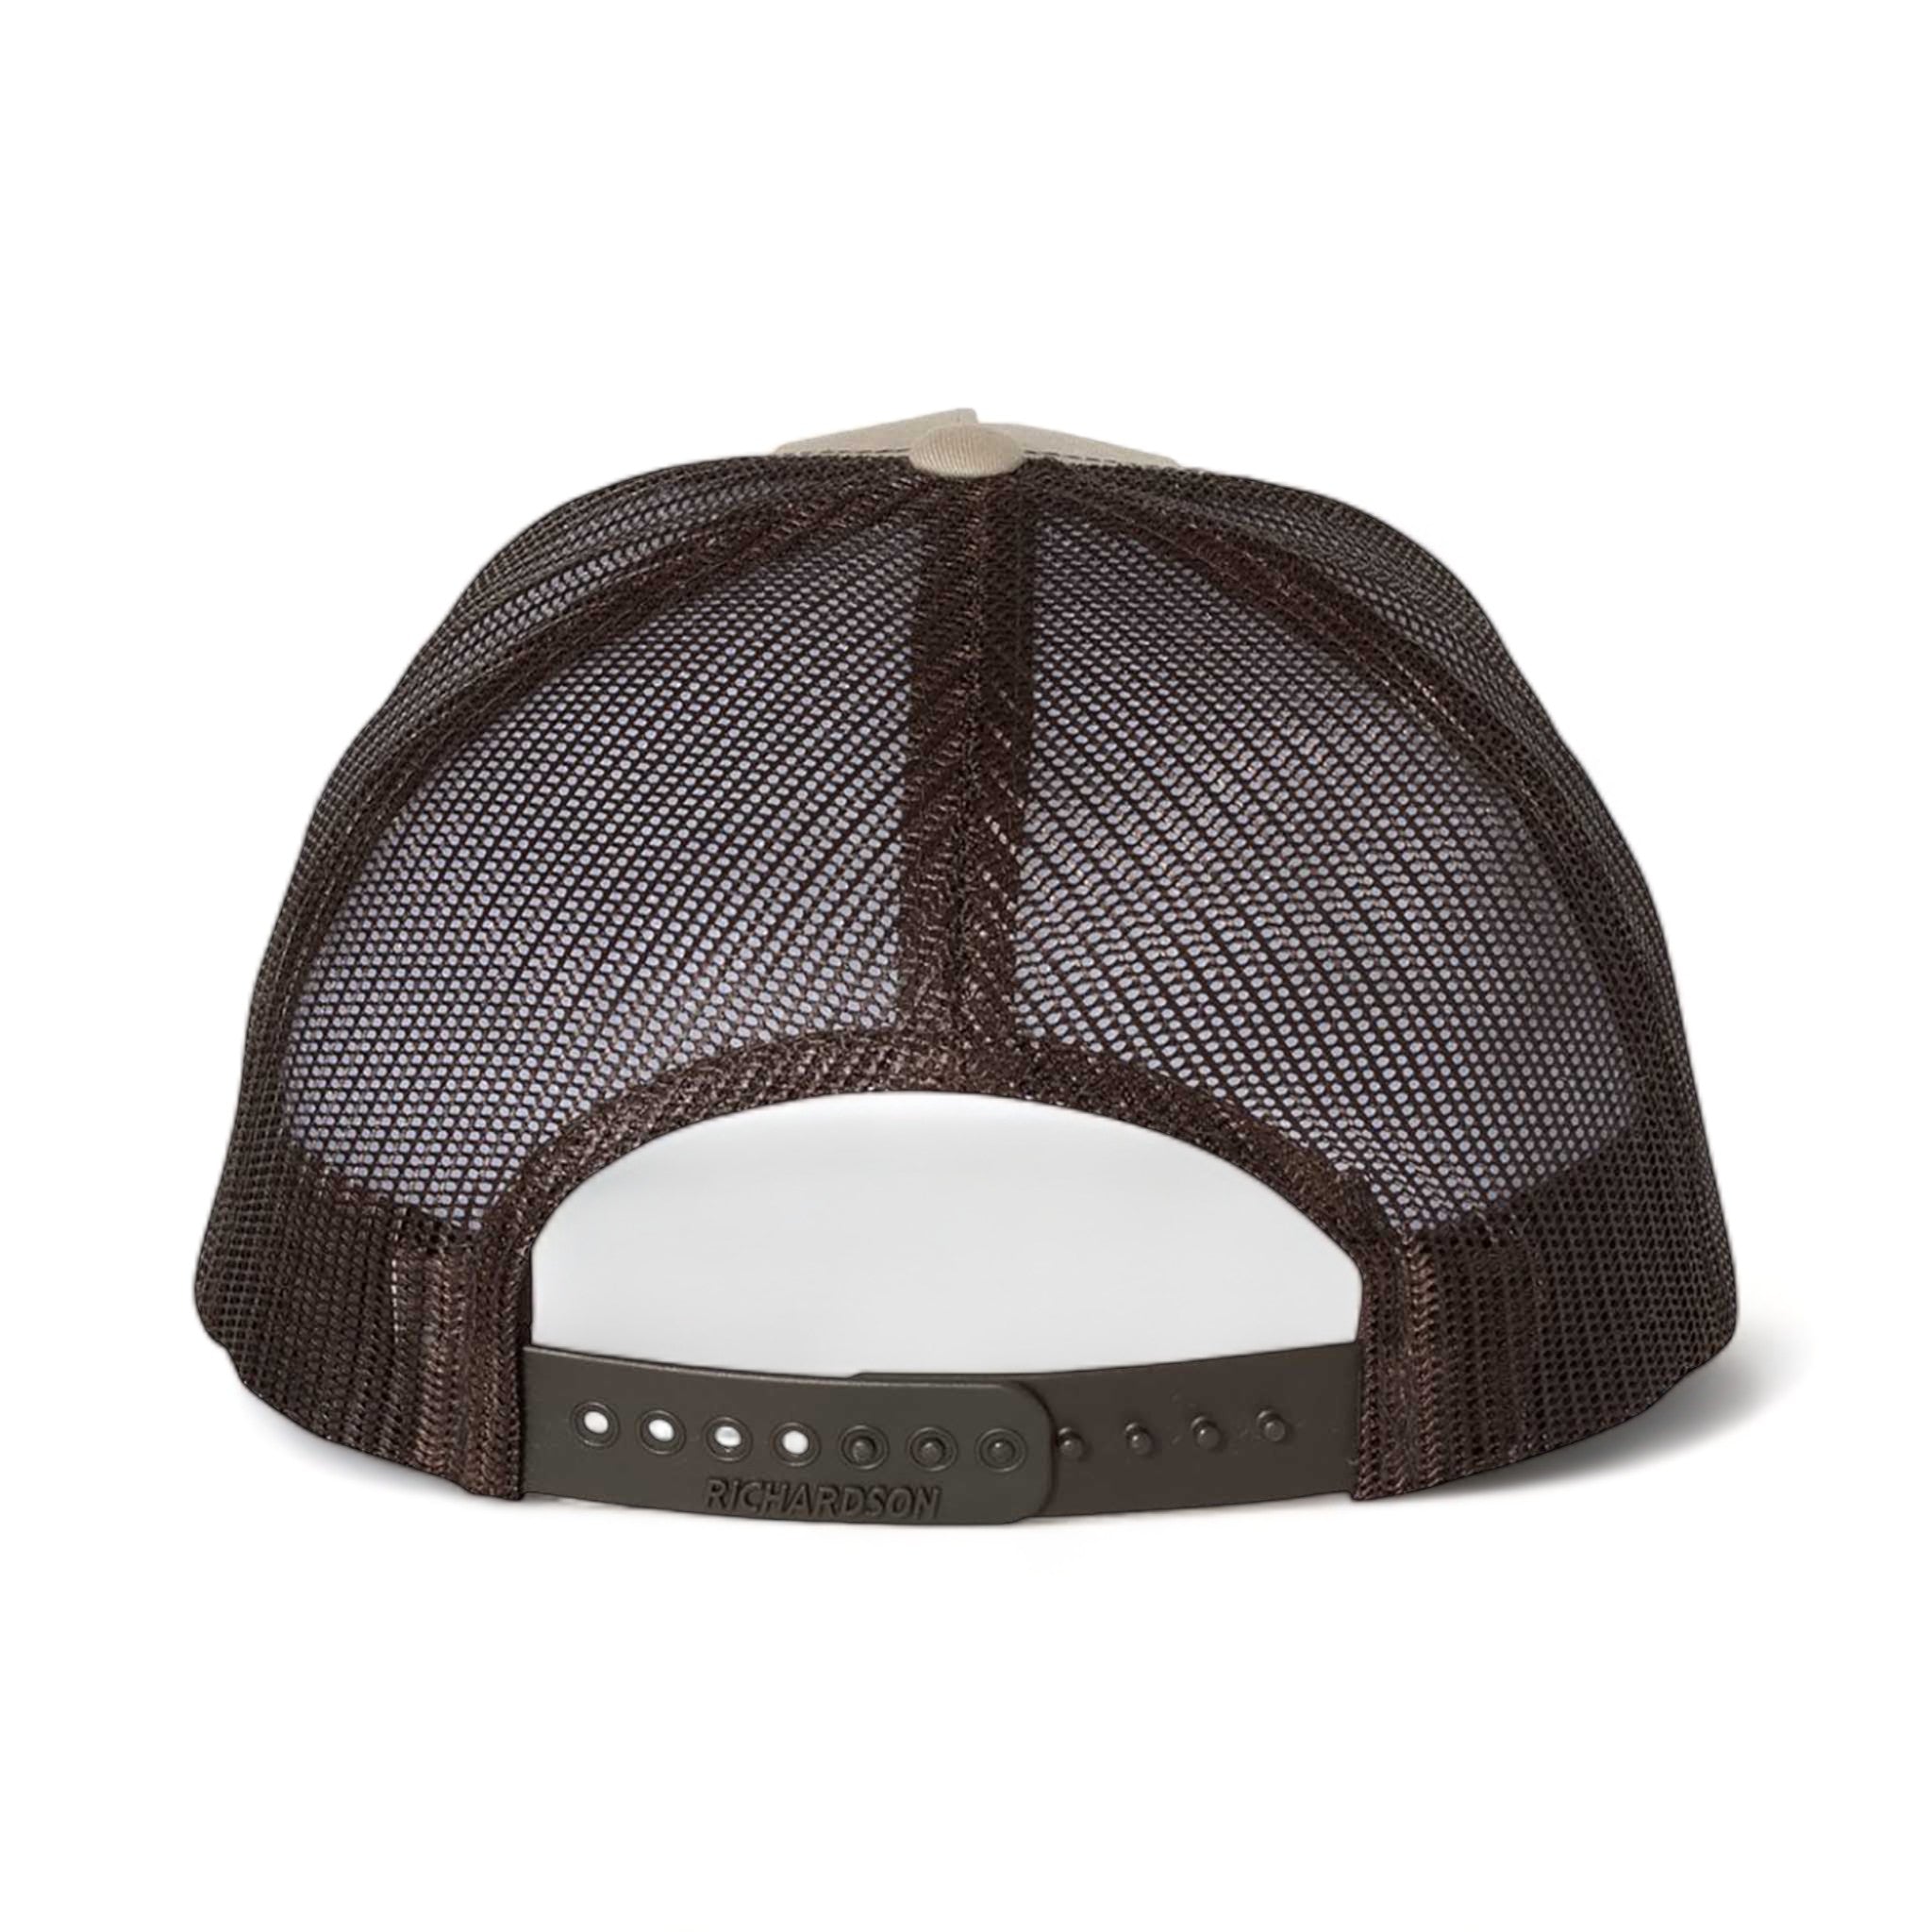 Back view of Richardson 112FP custom hat in khaki and coffee